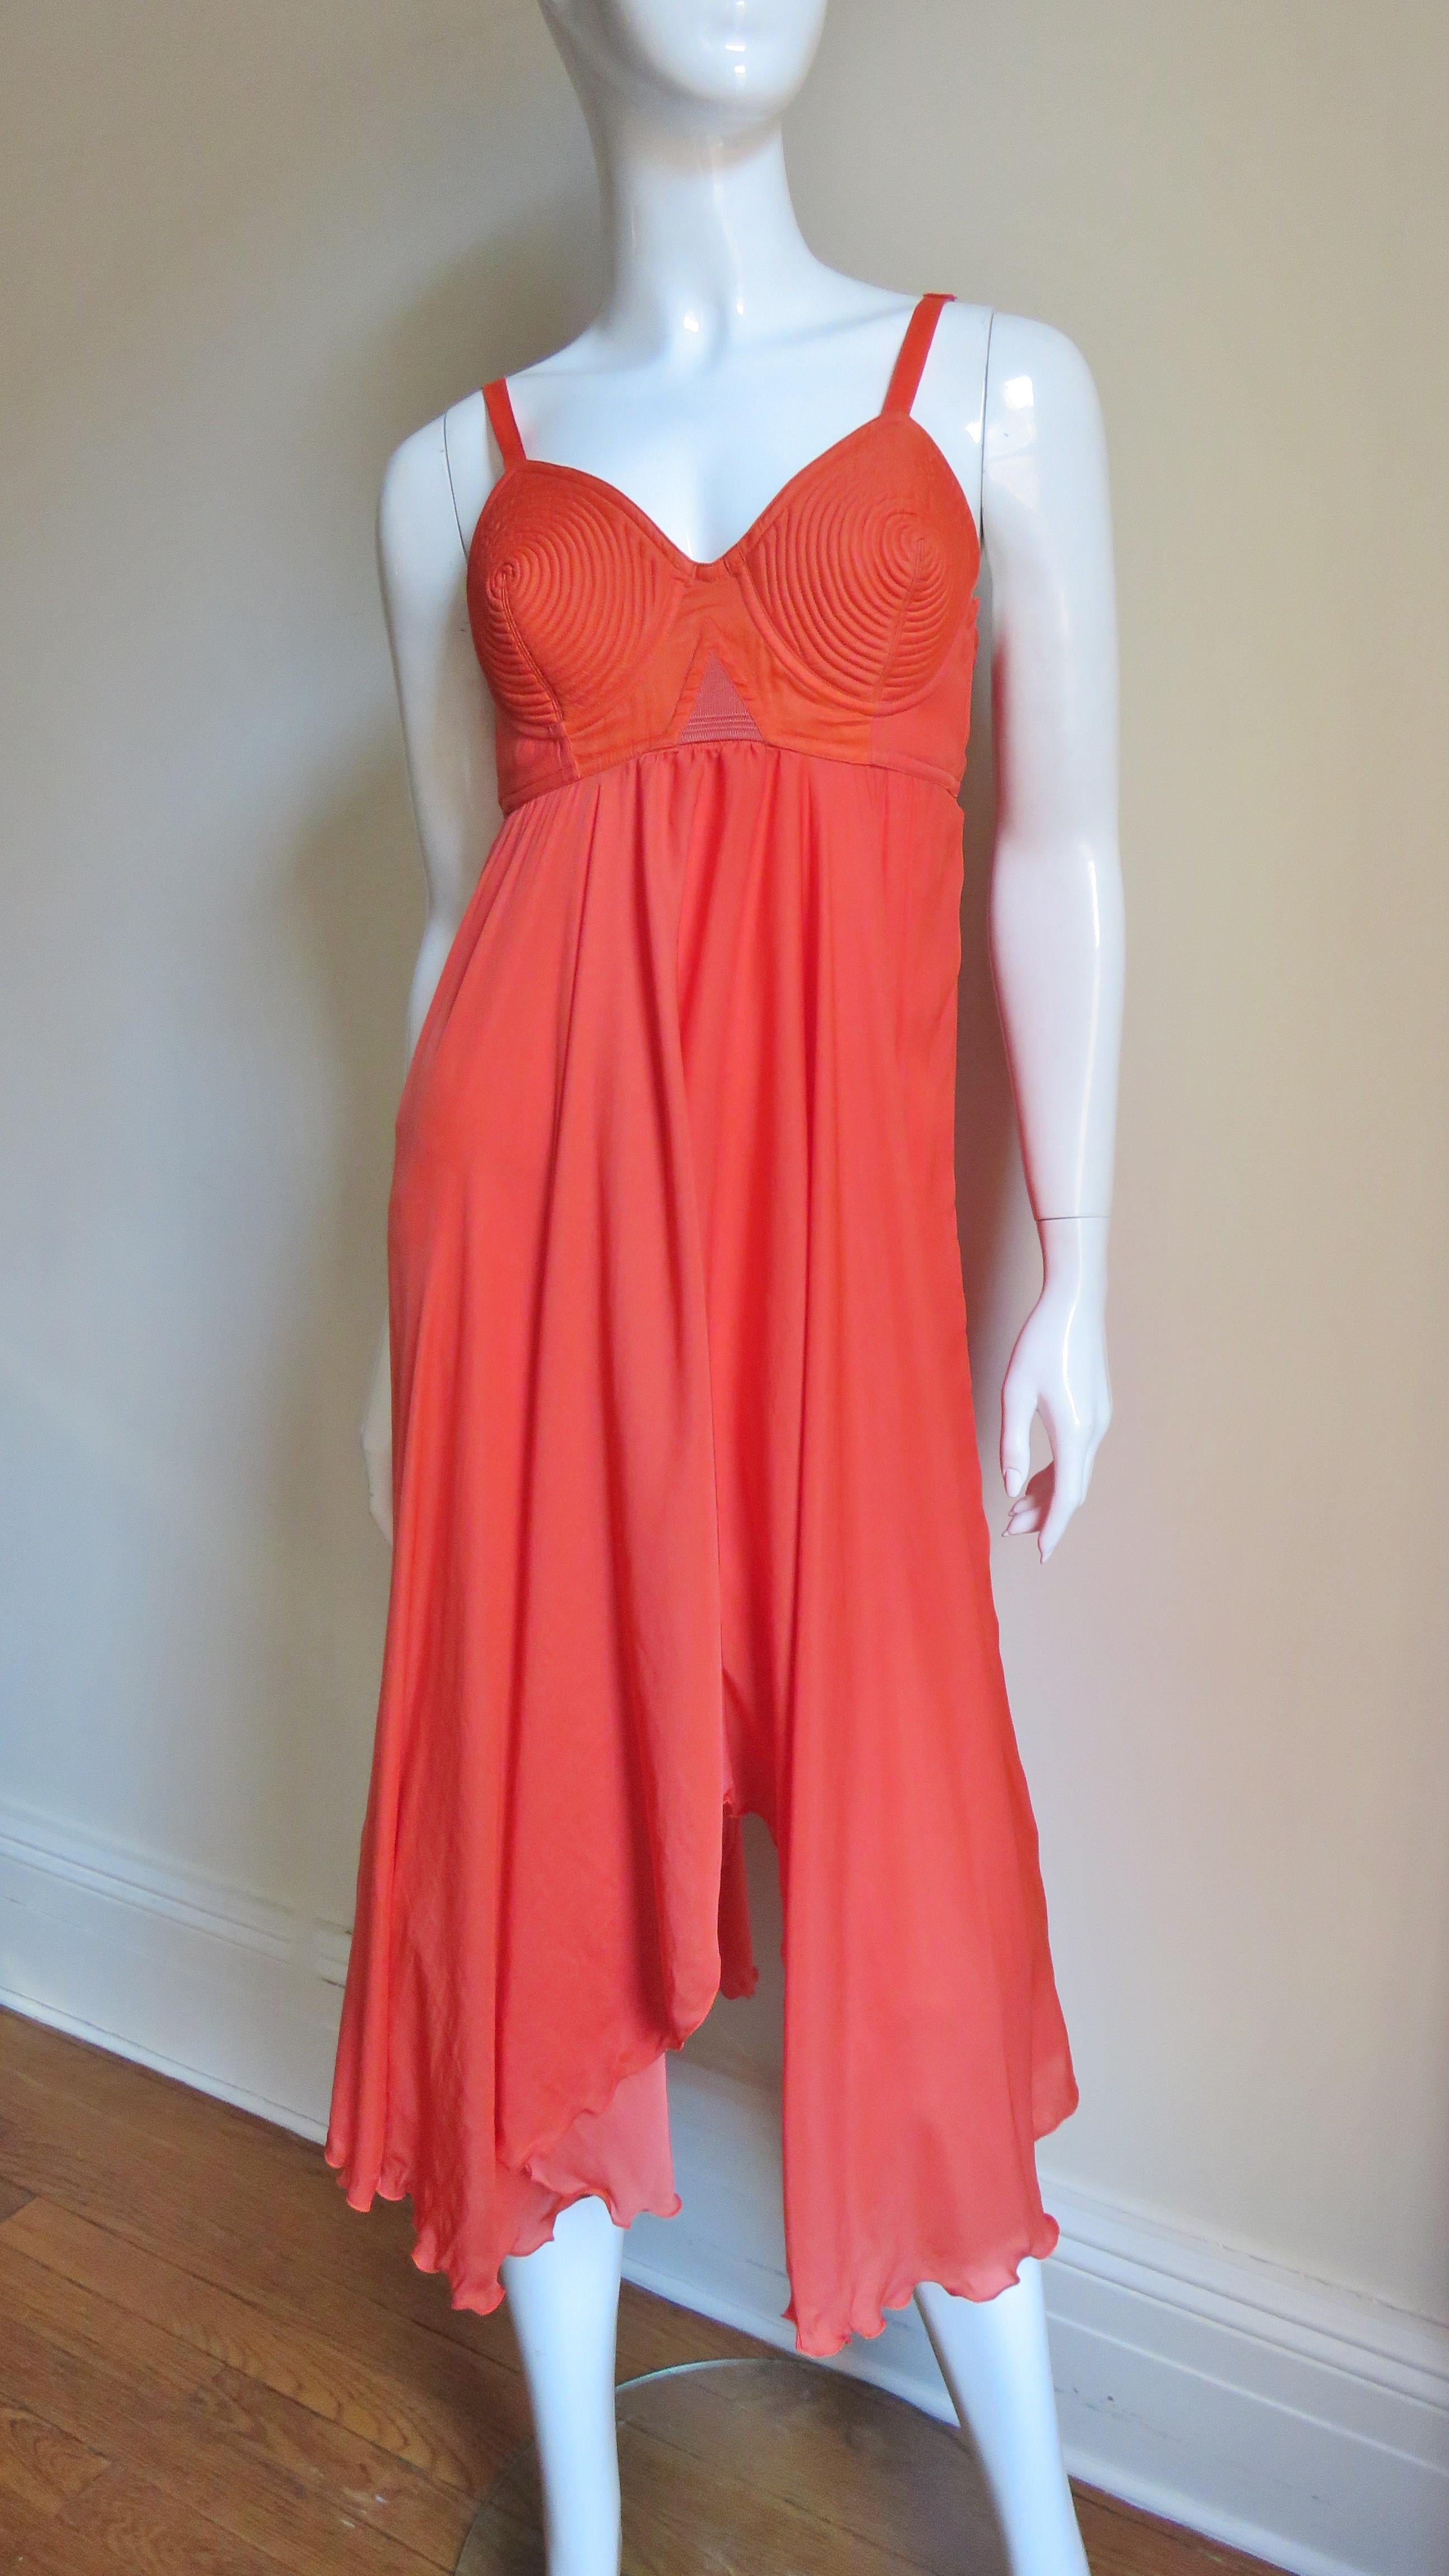 Jean Paul Gaultier Madonna esque Cone Bra Dress In Excellent Condition For Sale In Water Mill, NY